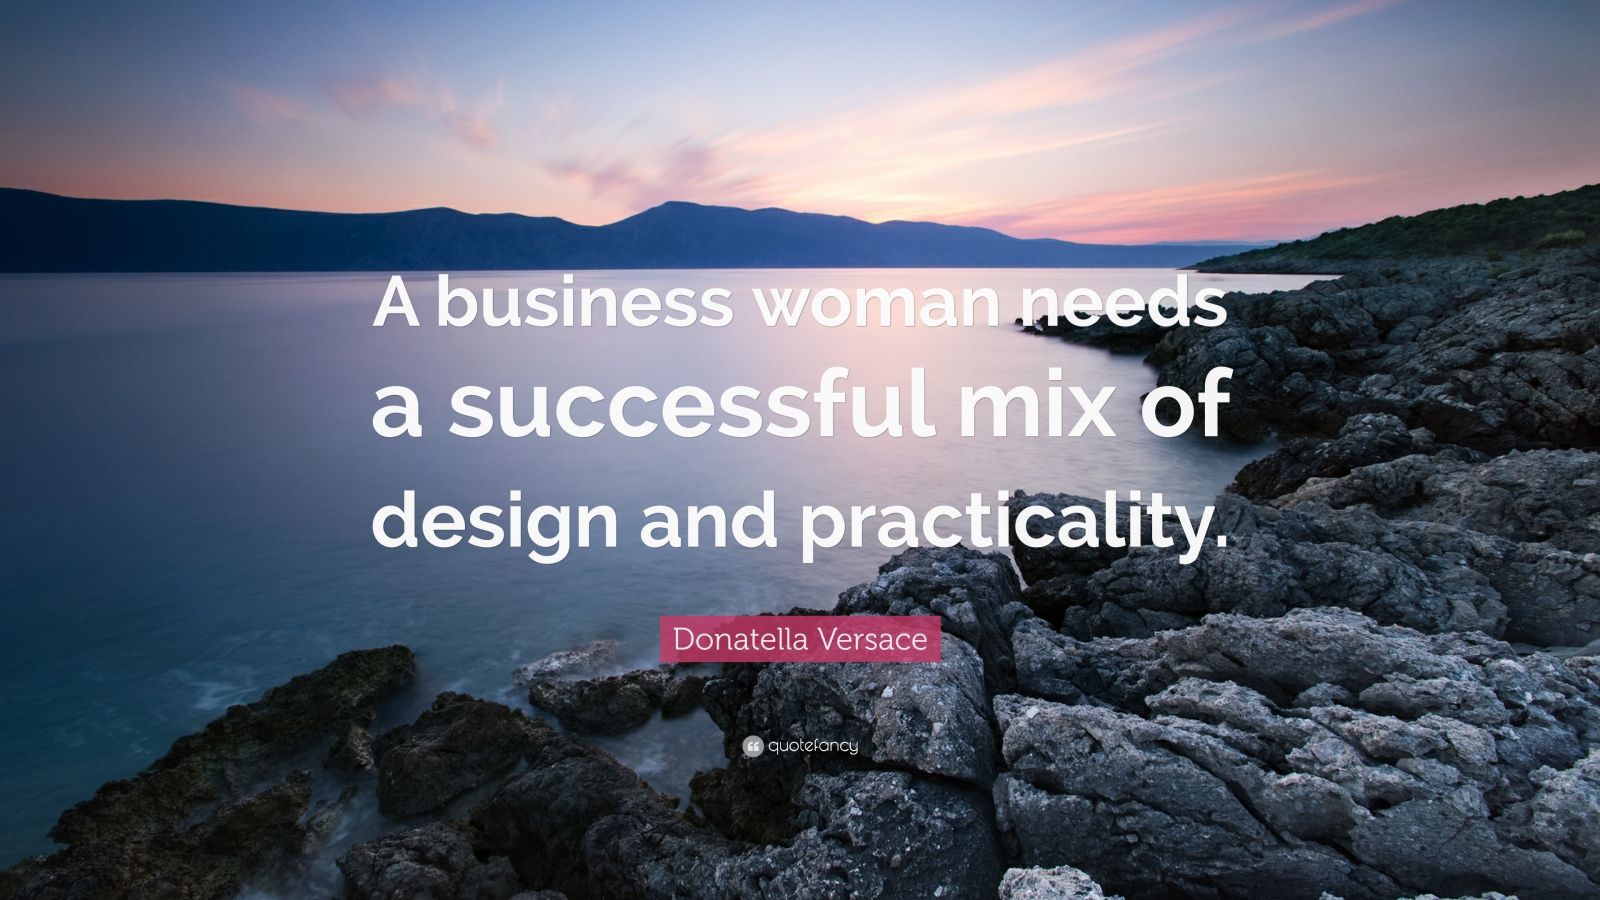 Donatella Versace Quote: “A business woman needs a successful mix of design and practicality.” (7 wallpaper)